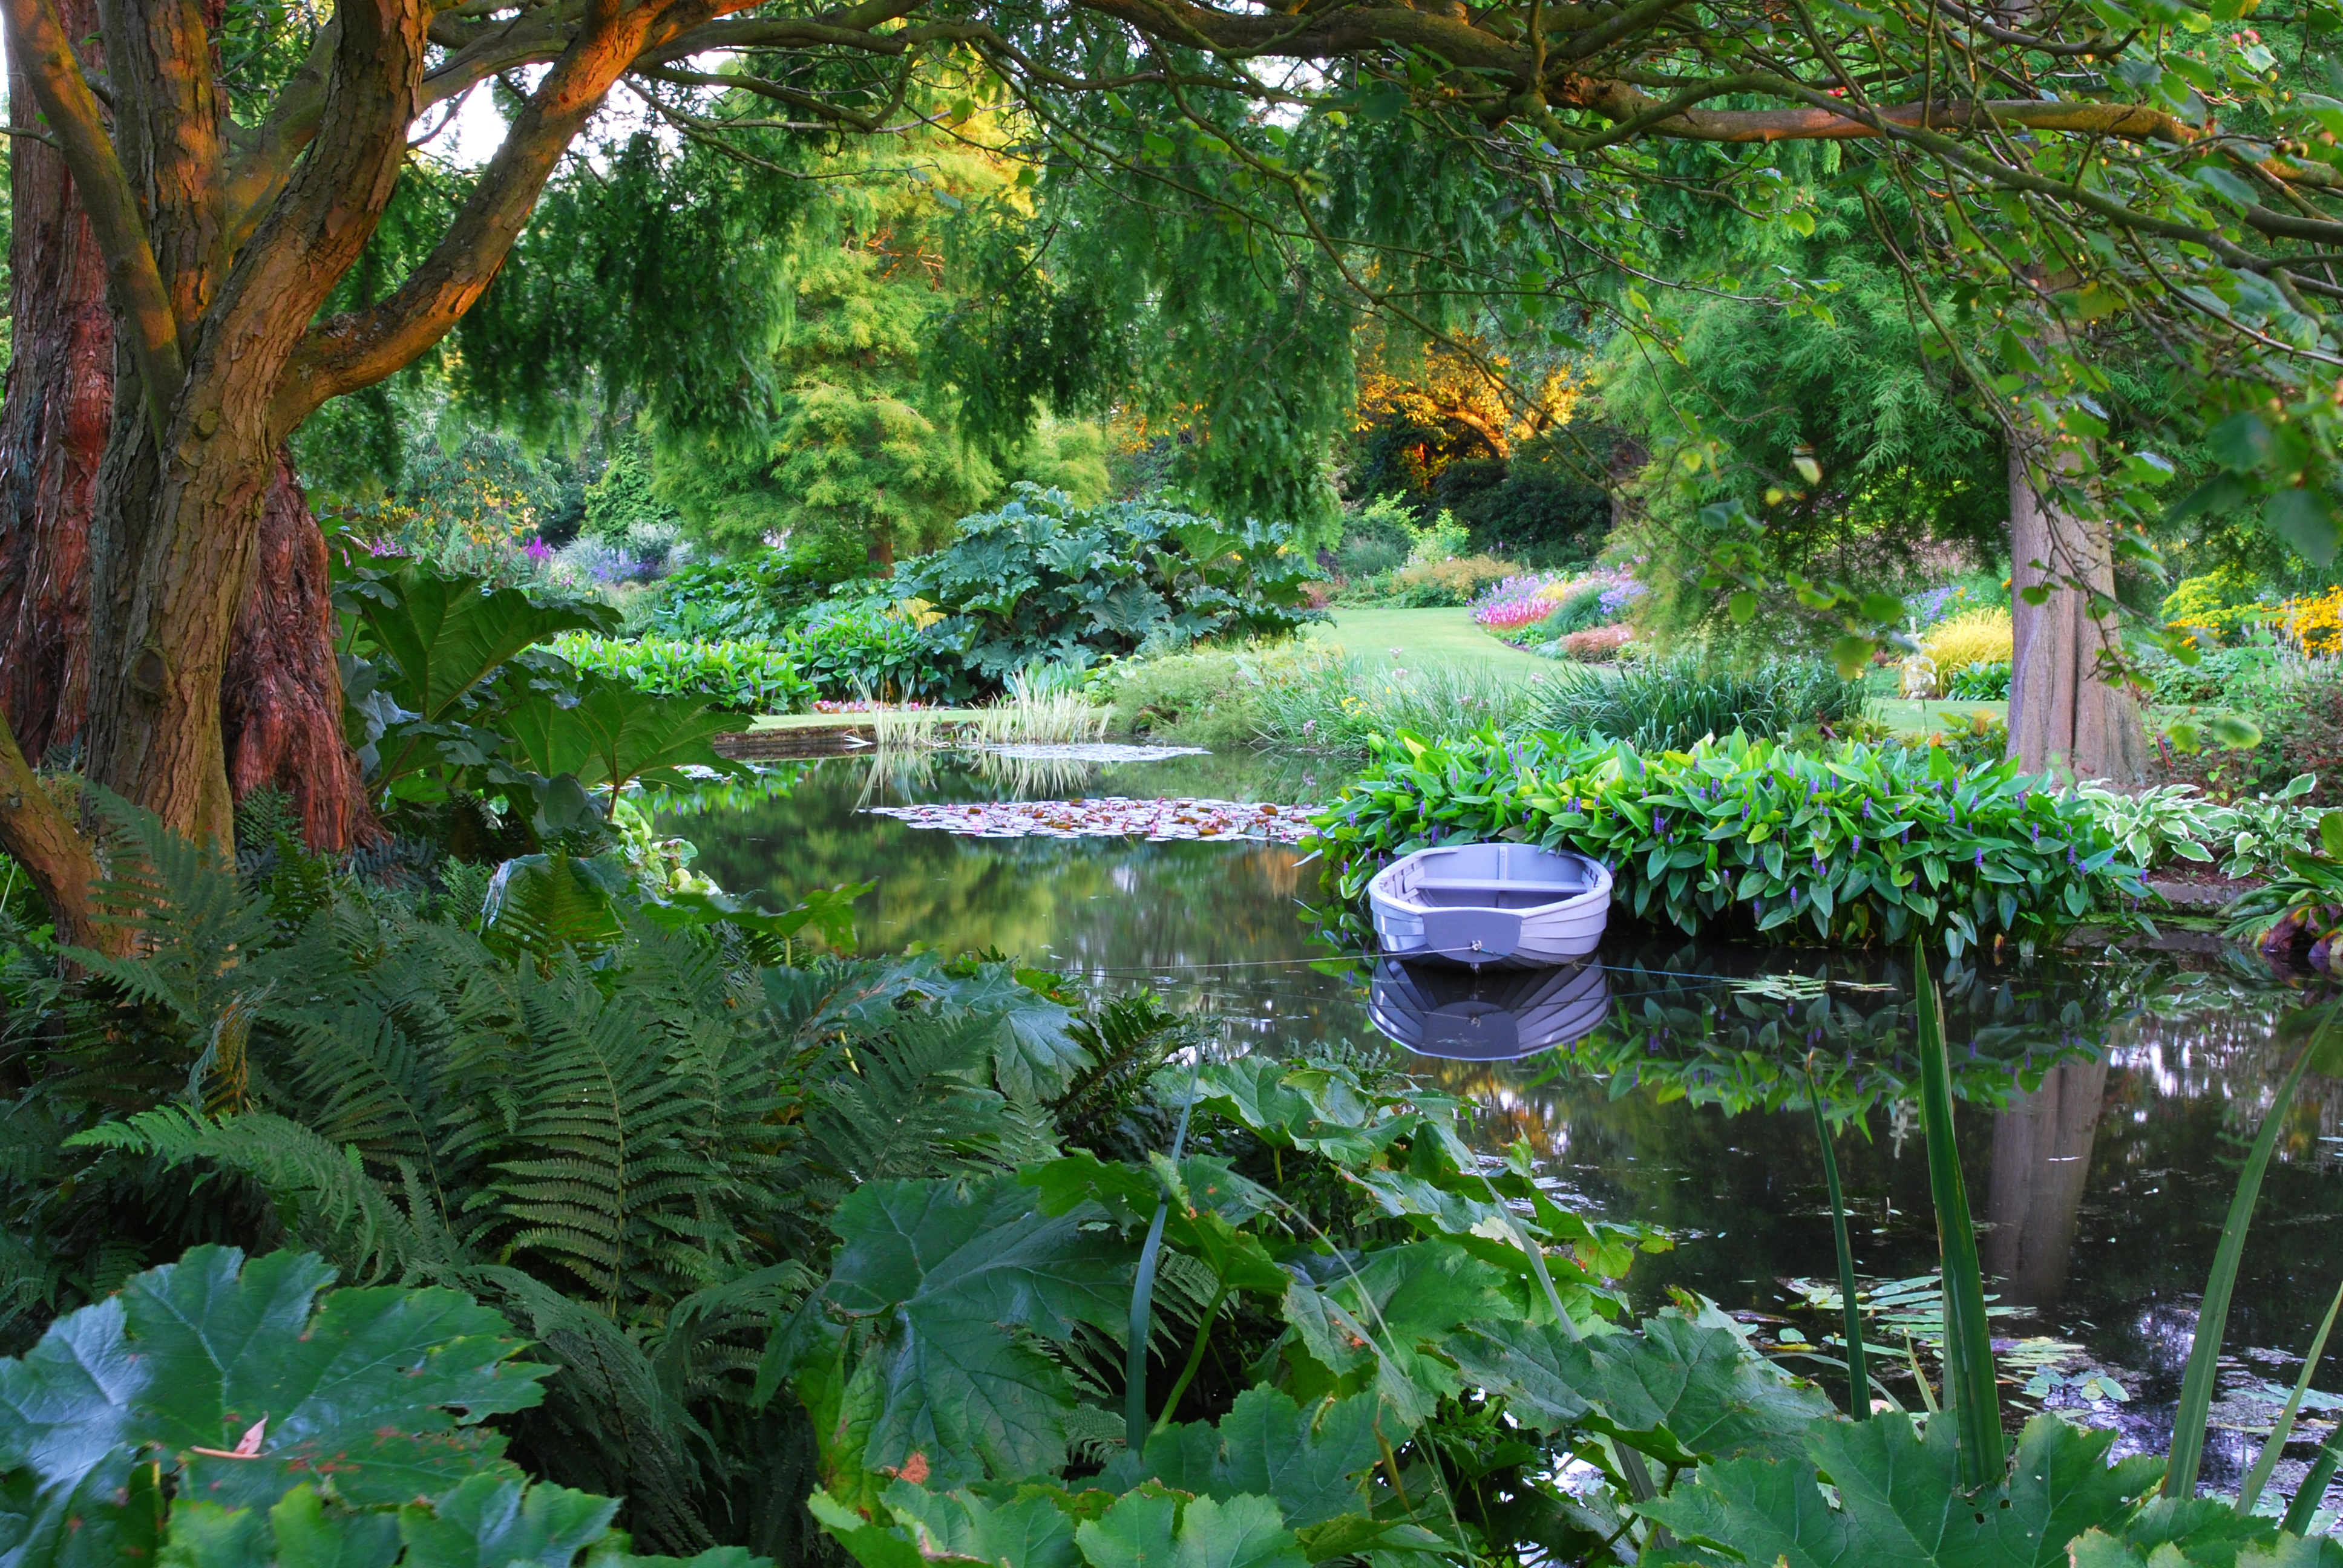 Picture of Beth Chatto Gardens - Water Garden